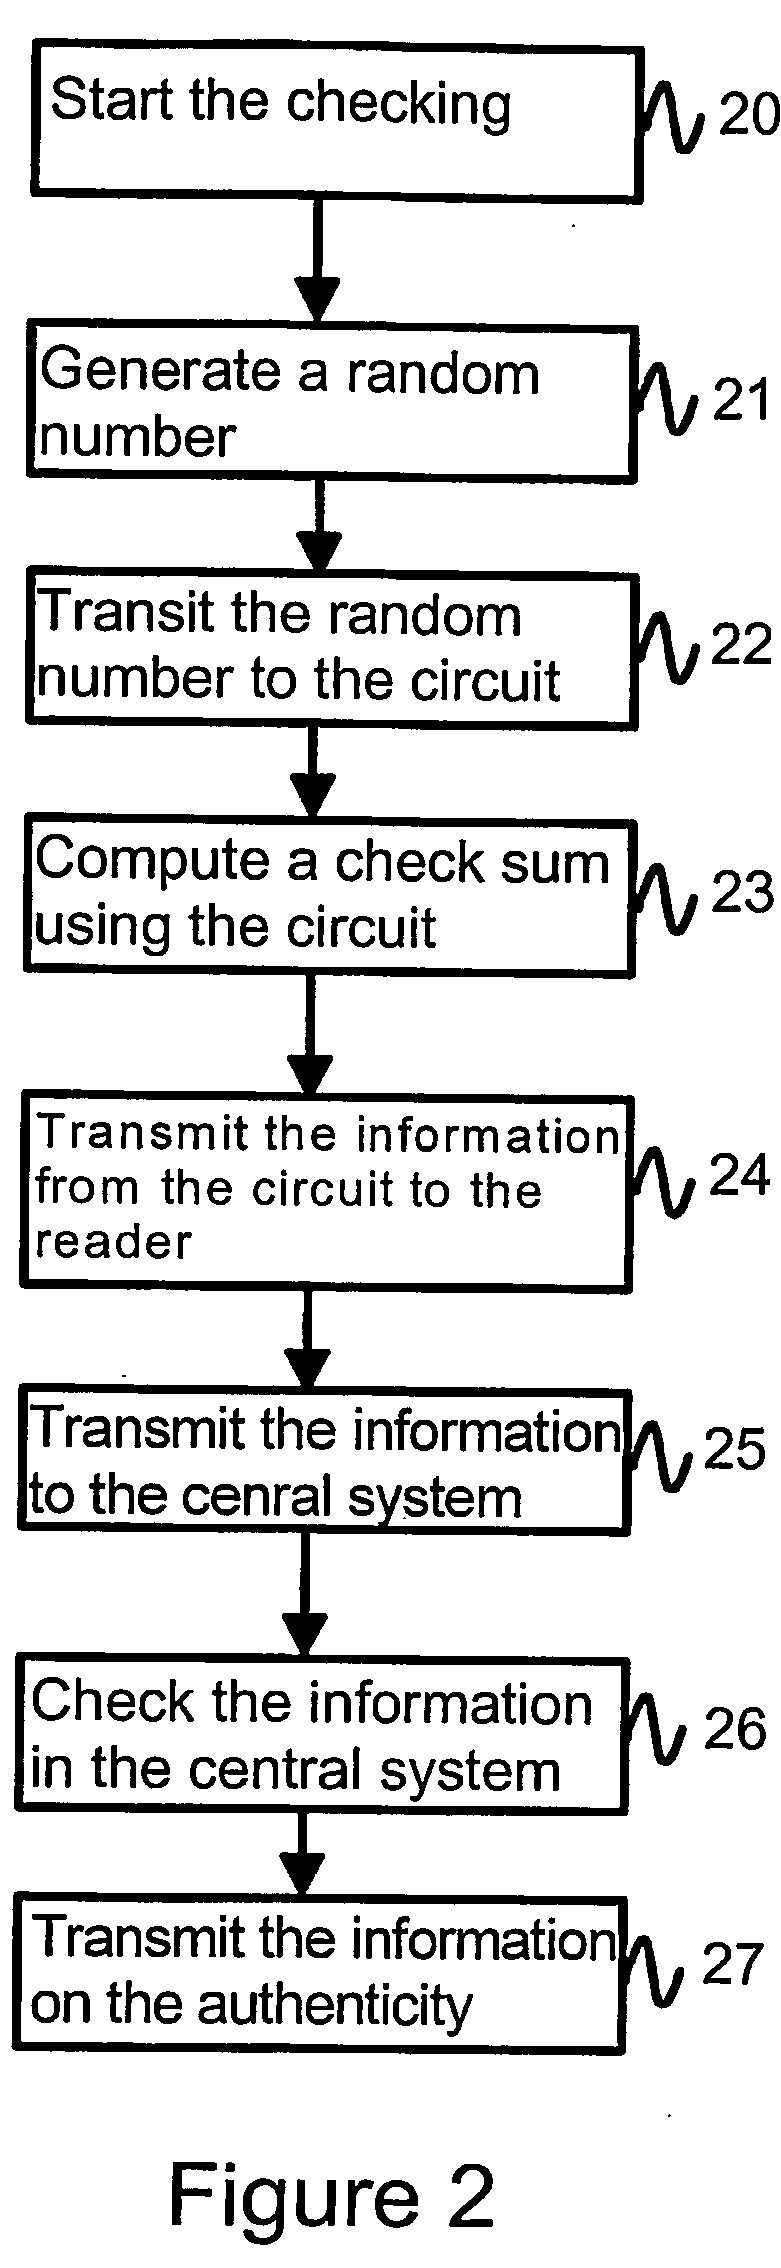 Verification of a product identifier